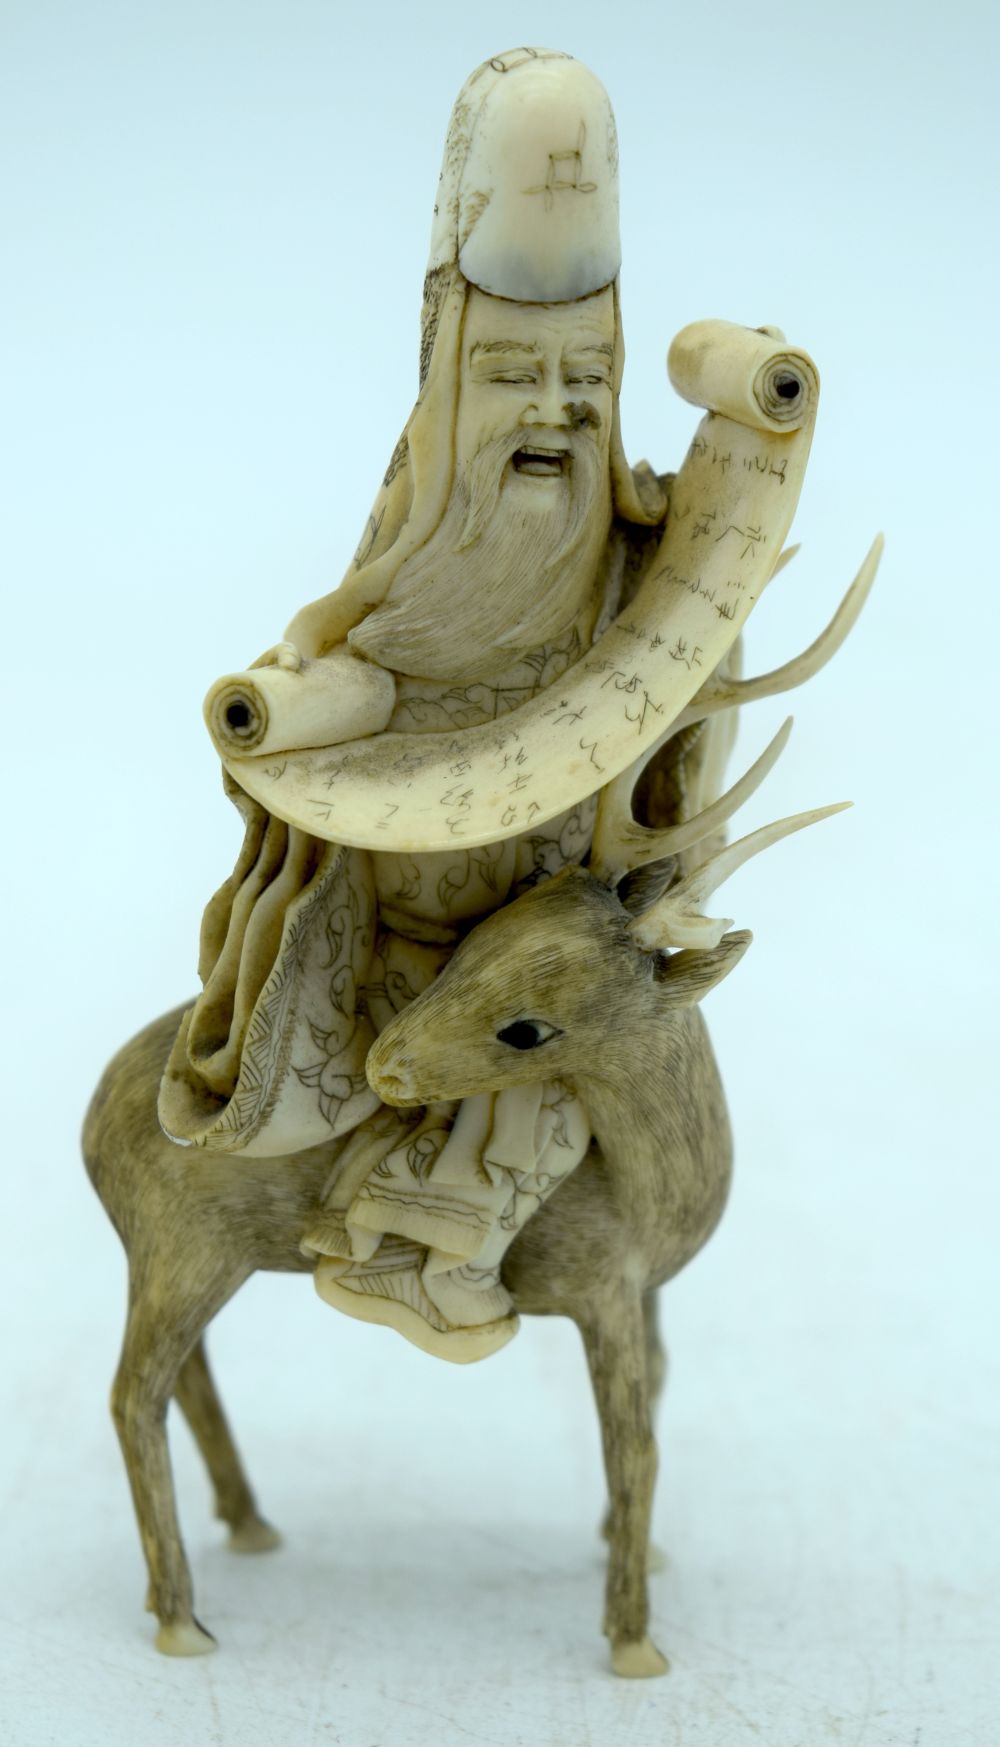 A 19TH CENTURY JAPANESE MEIJI PERIOD CARVED IVORY OKIMONO modelled holding a scroll upon a deer. 10